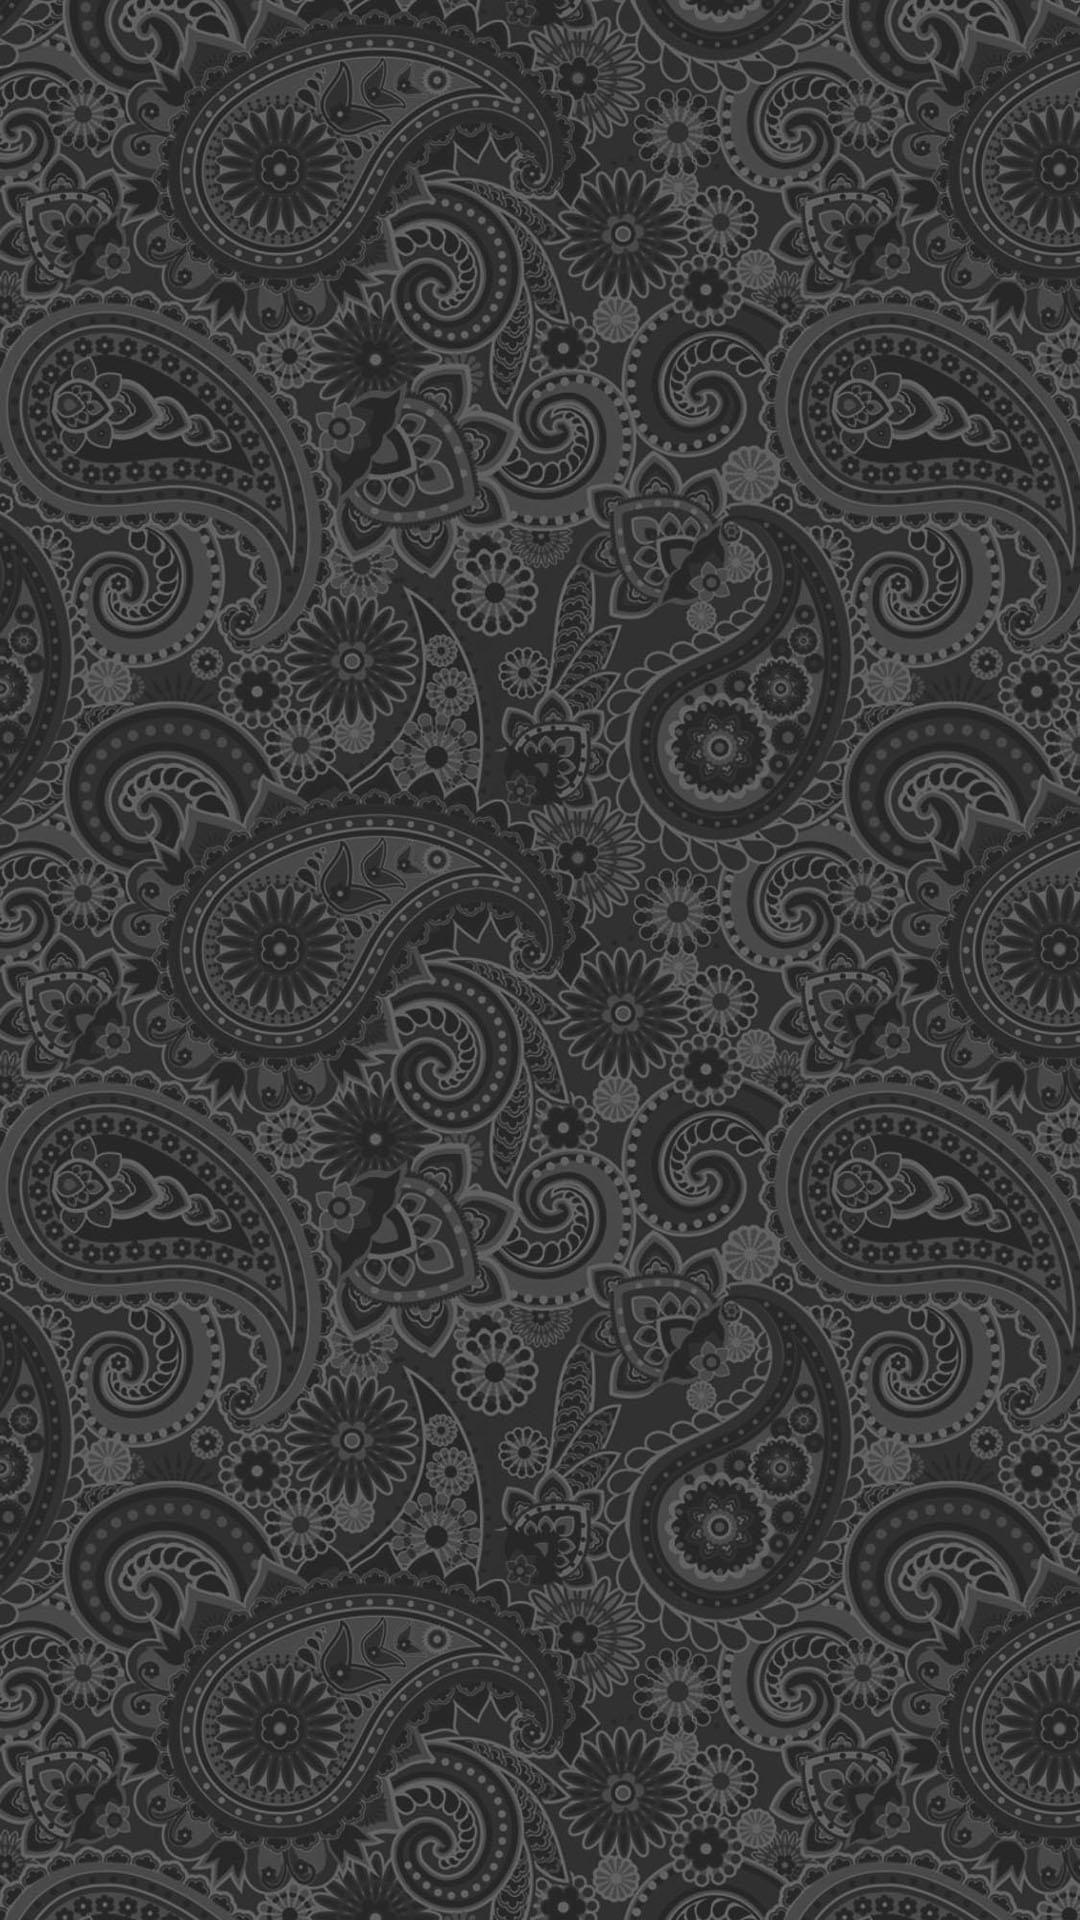 Black Paisley Wallpapers - Top Free Black Paisley Backgrounds ...